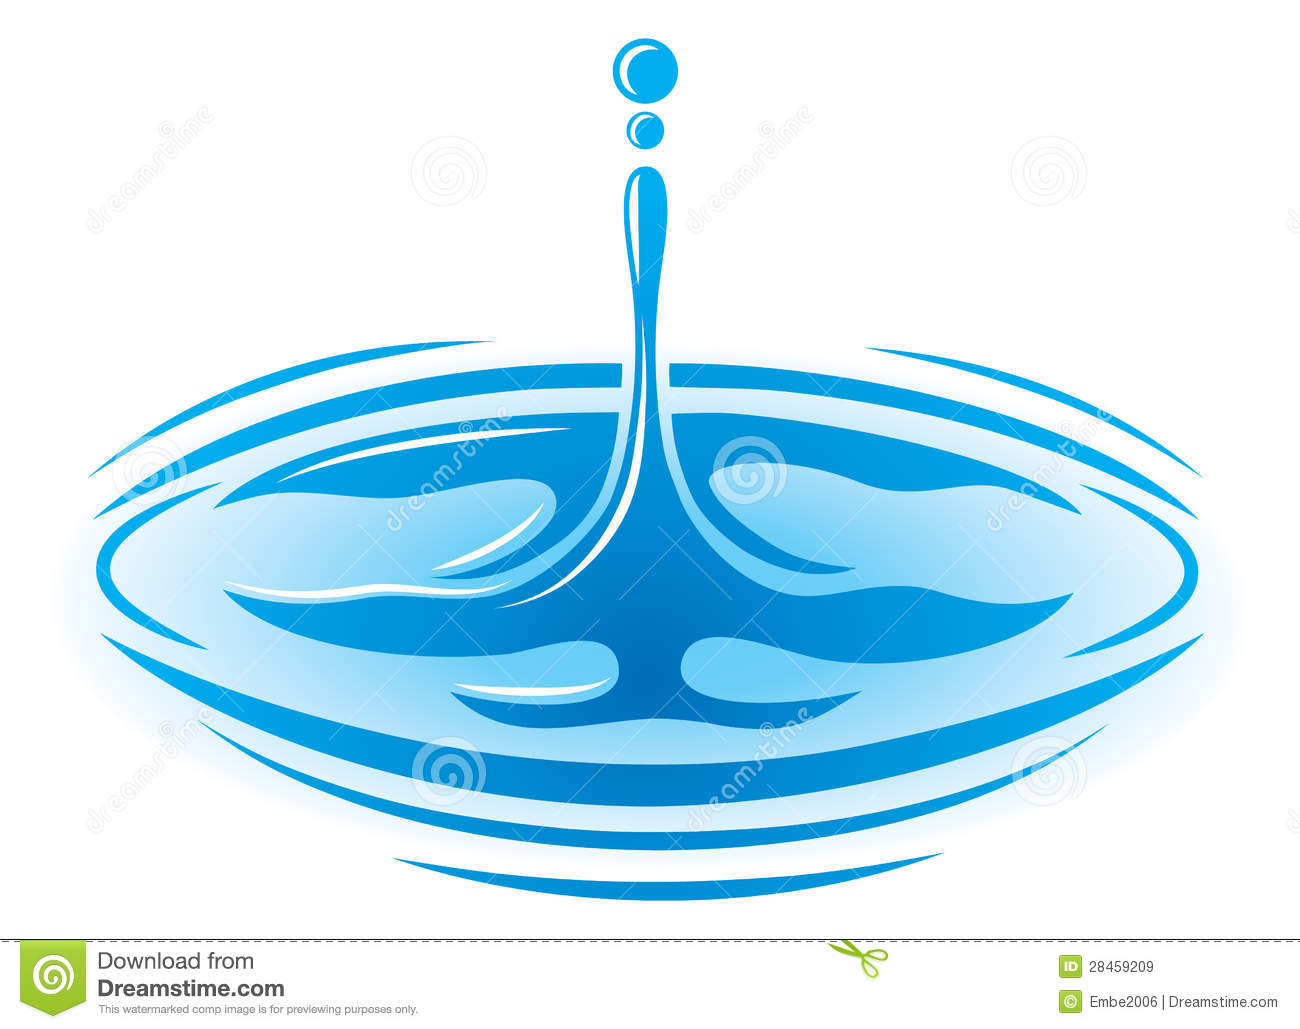 12 Water Ripple Icon Images